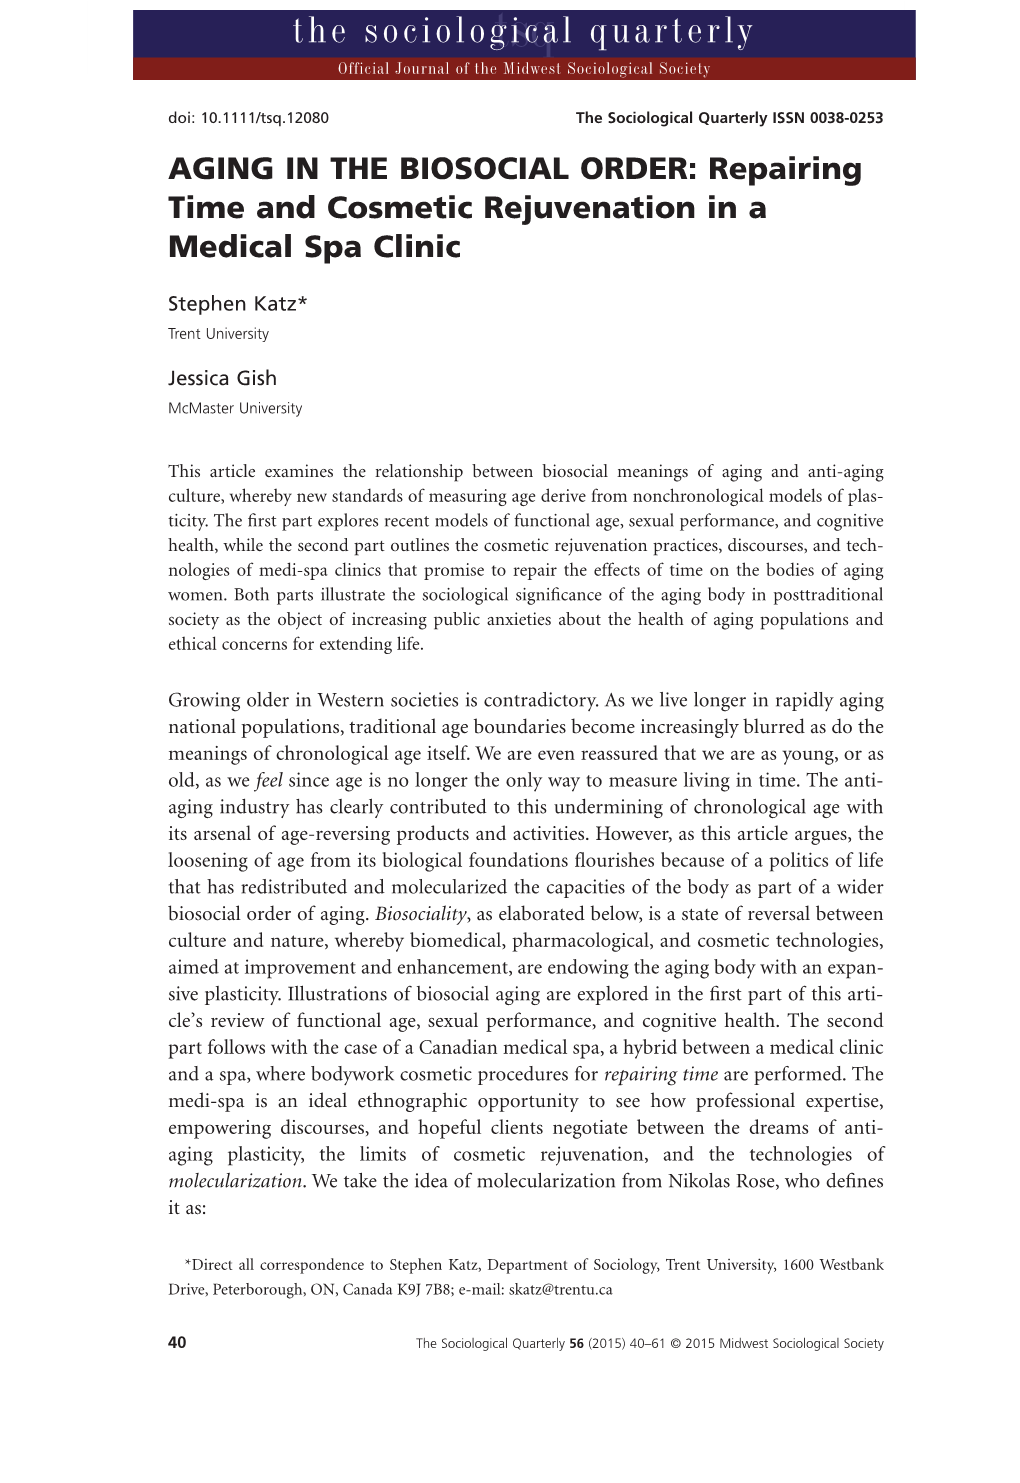 AGING in the BIOSOCIAL ORDER: Repairing Time and Cosmetic Rejuvenation in a Medical Spa Clinic